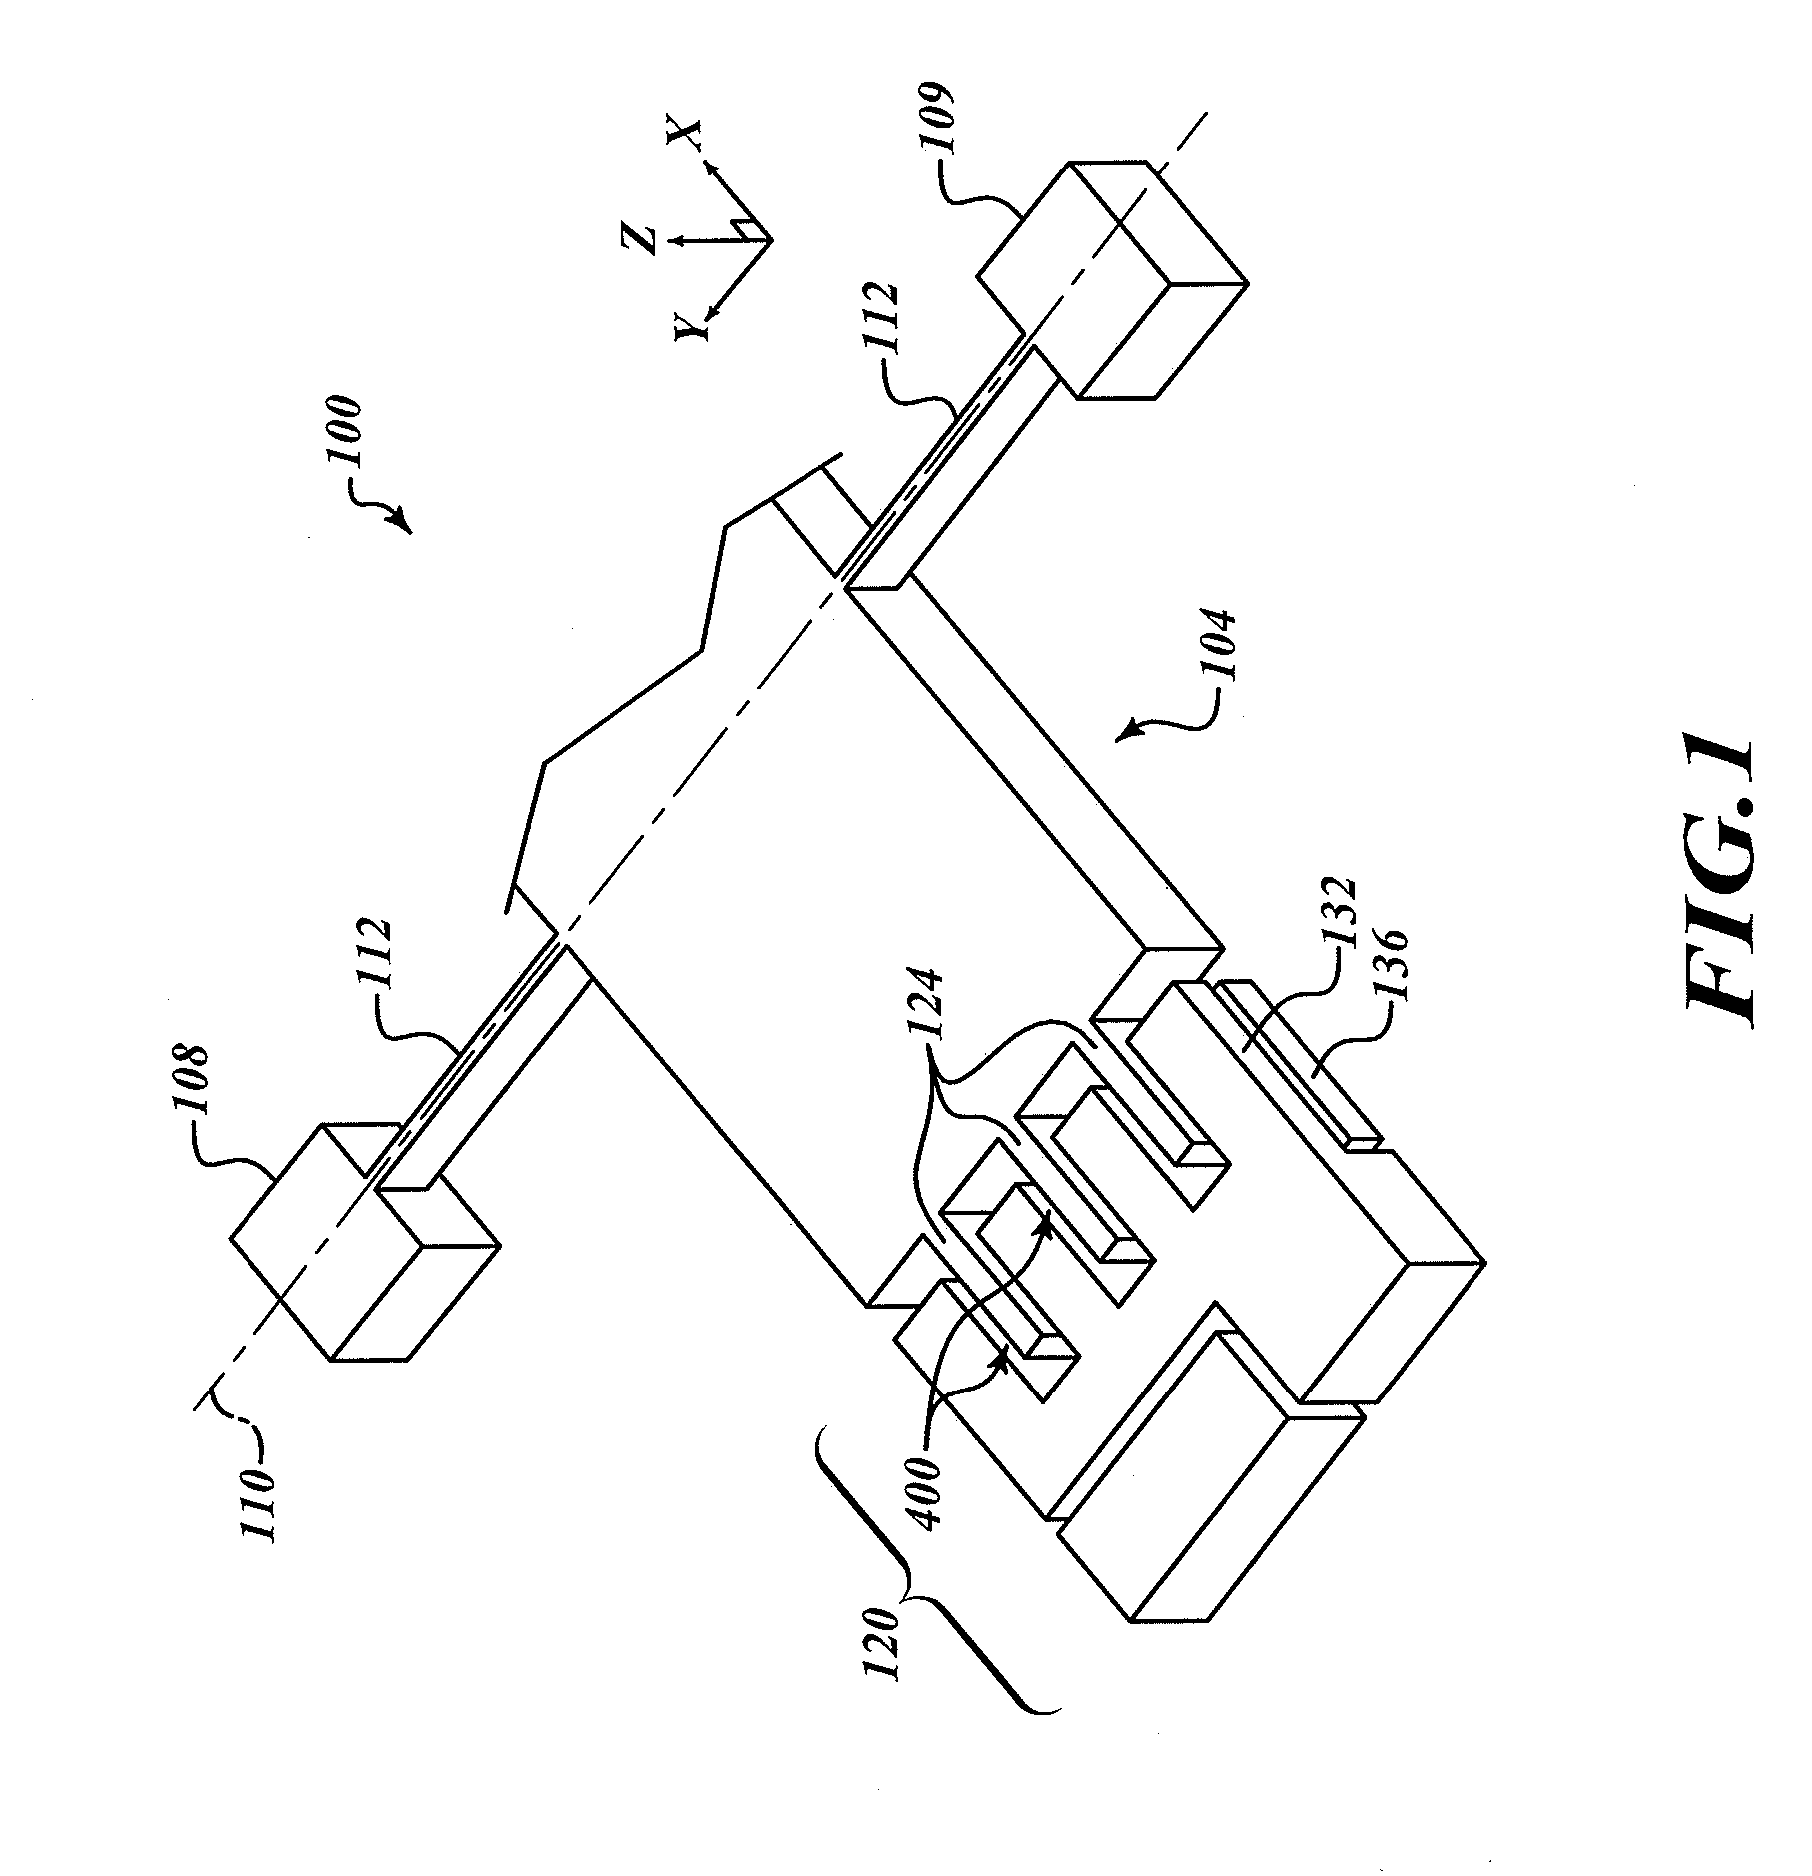 Bidirectional, out-of-plane, comb drive accelerometer